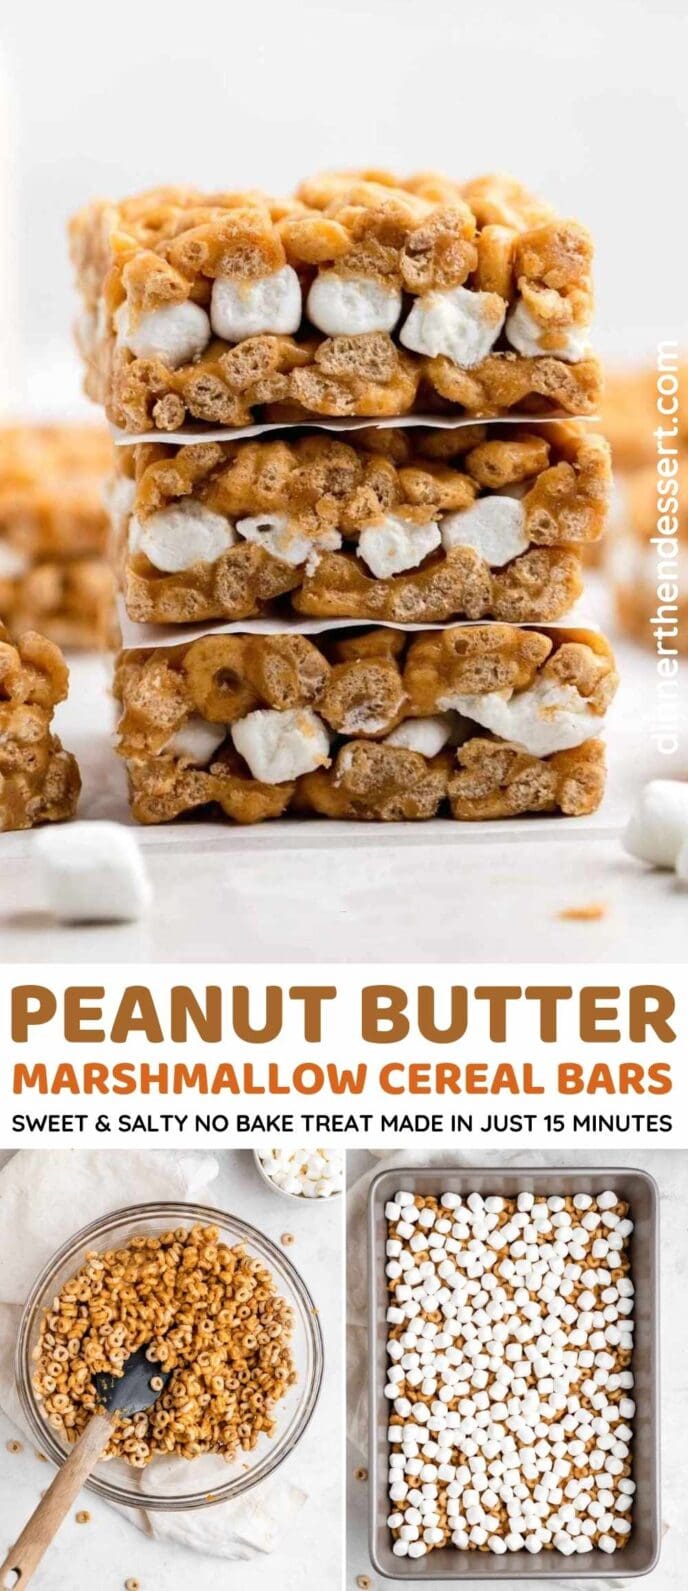 Peanut Butter Marshmallow Cereal Bars Collage